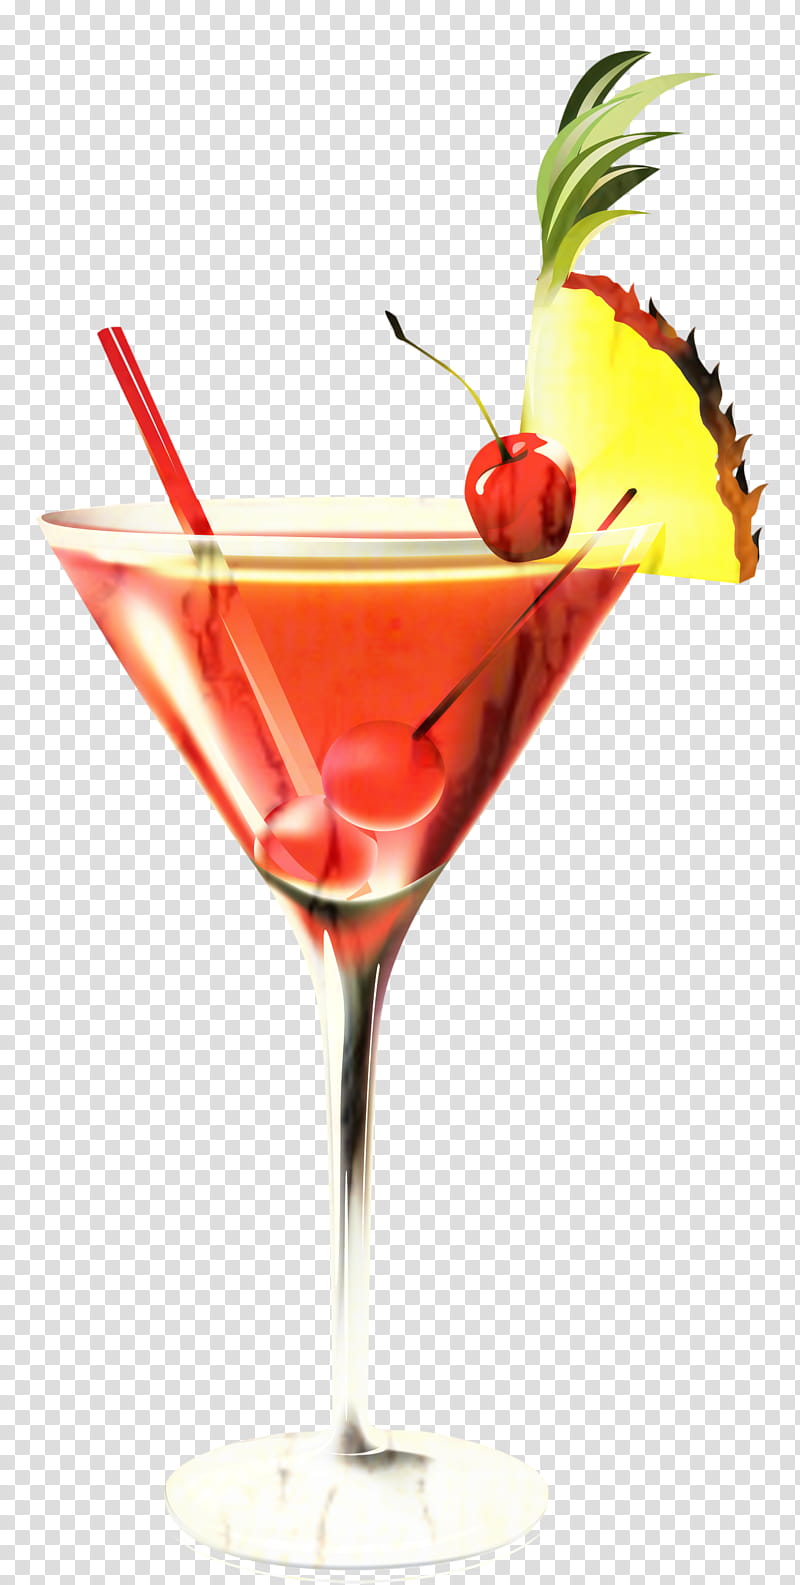 Zombie, Martini, Cocktail, Wine Cocktail, Blue Lagoon, Bacardi Cocktail, Vodka Martini, Screwdriver transparent background PNG clipart